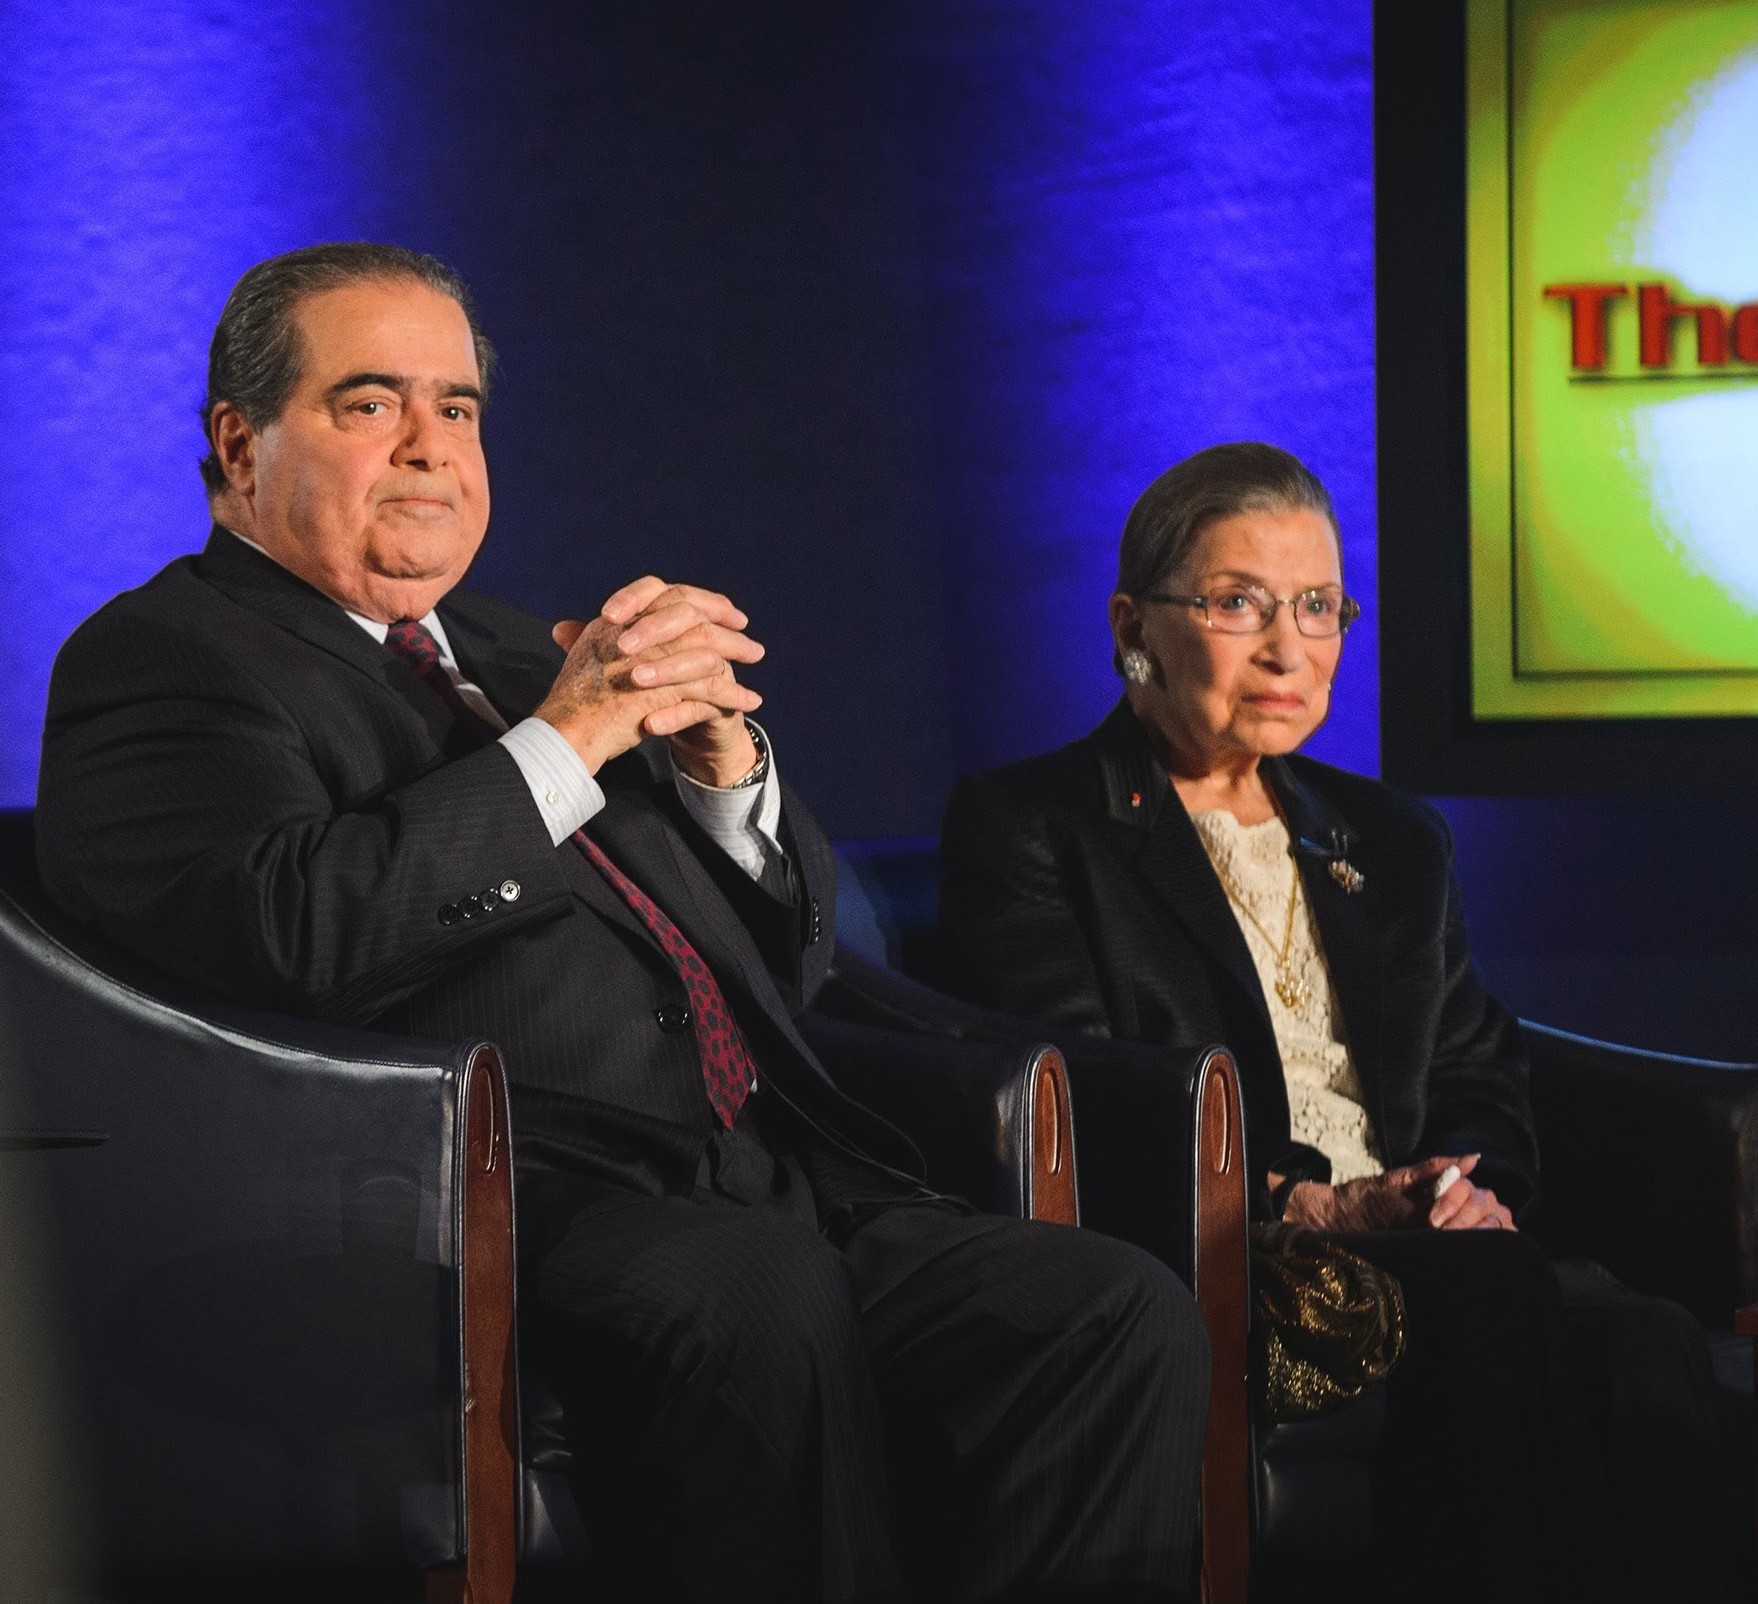 Justices RBG and Scalia